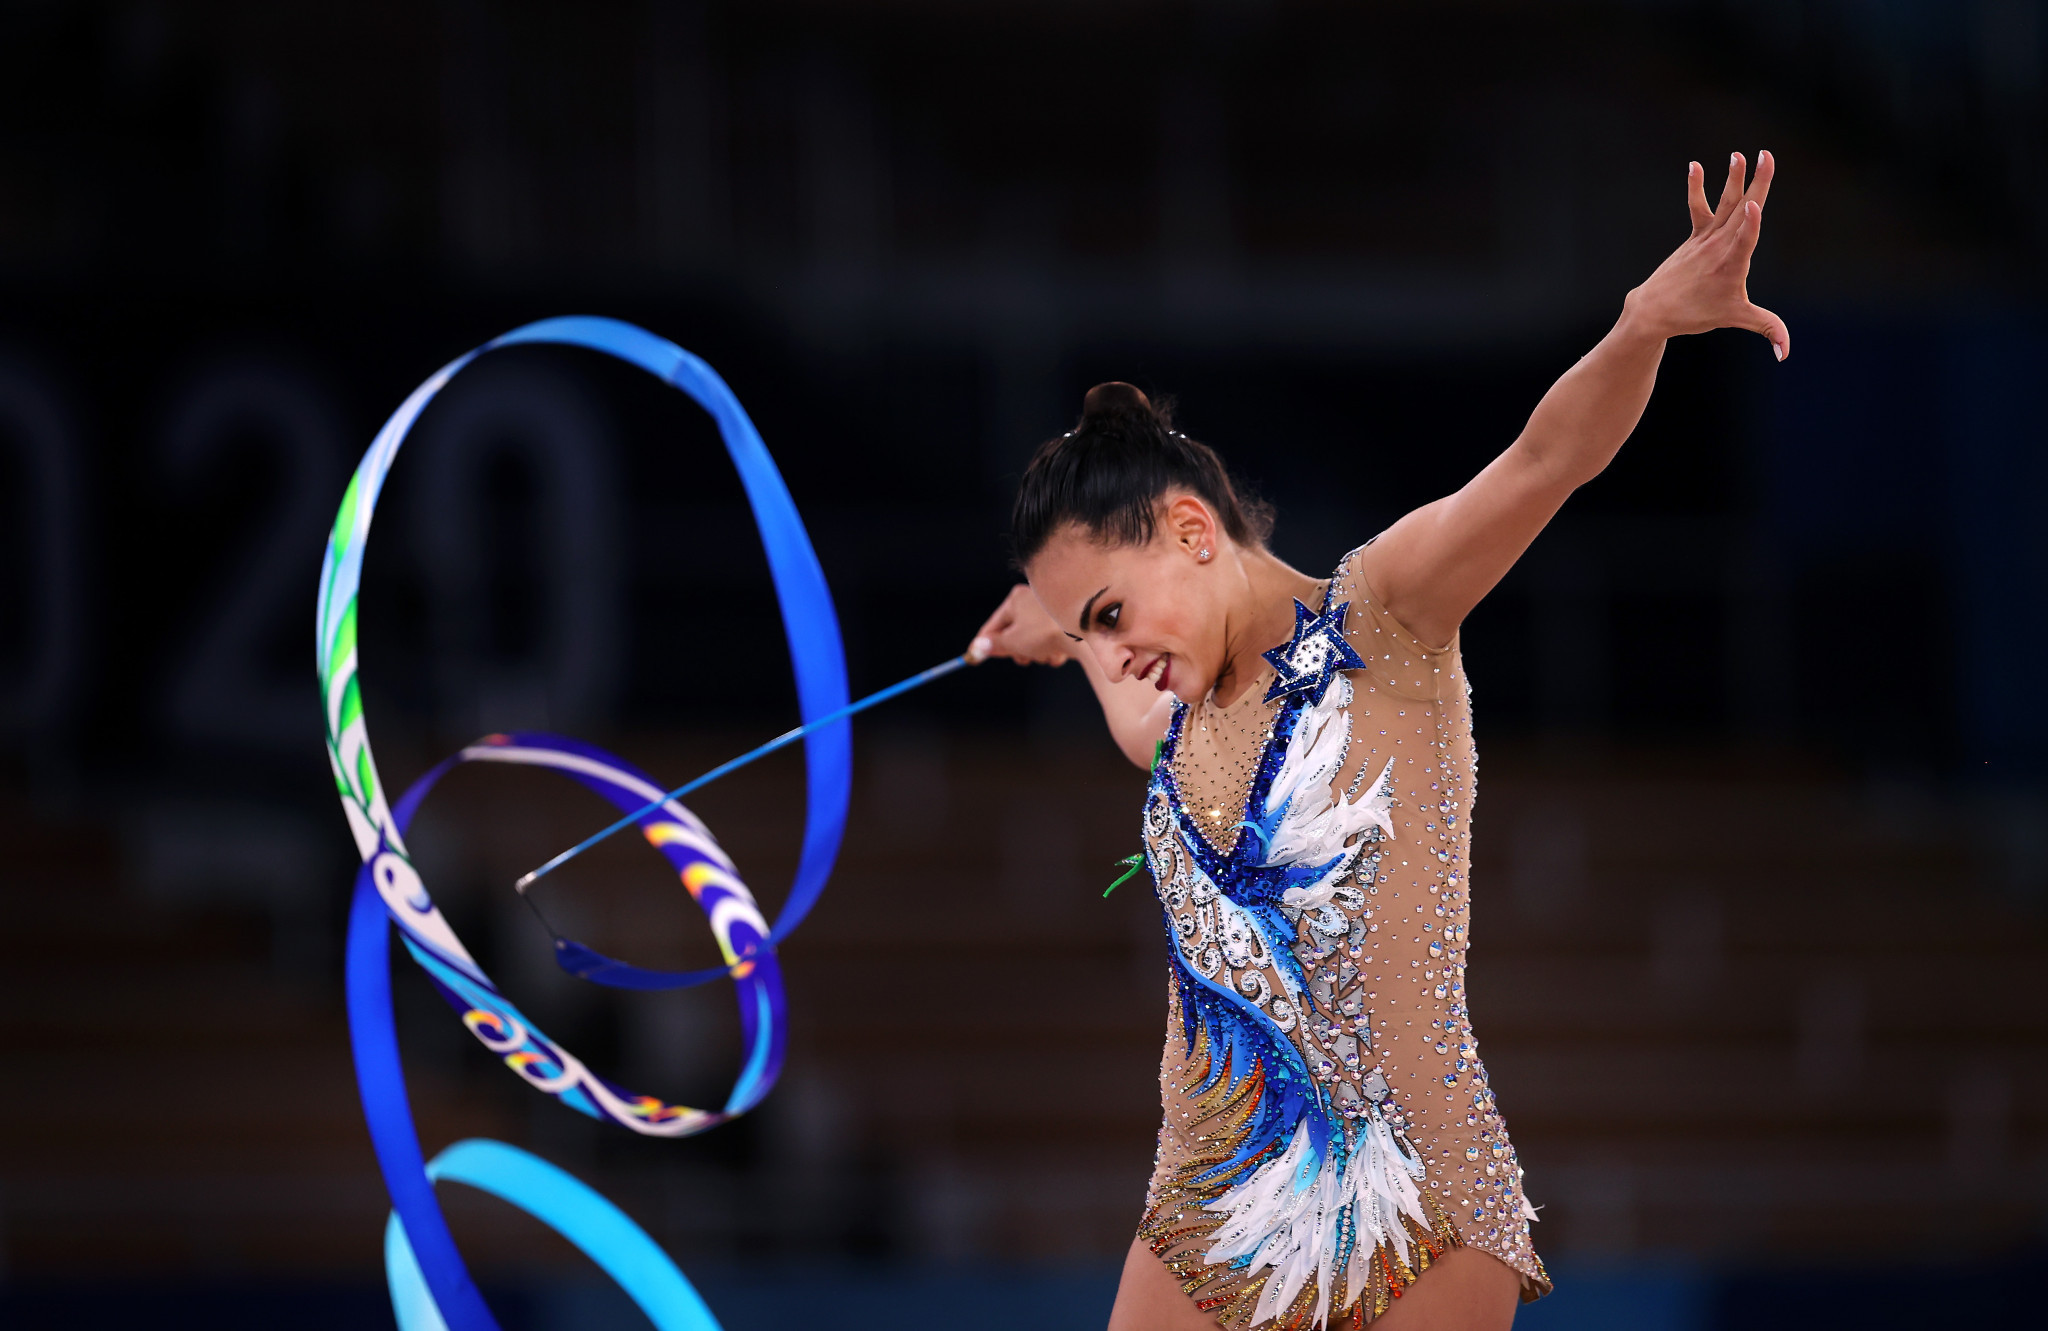 Linoy Ashram won the women's all-around title at the Tokyo 2020 Olympics ©Getty Images